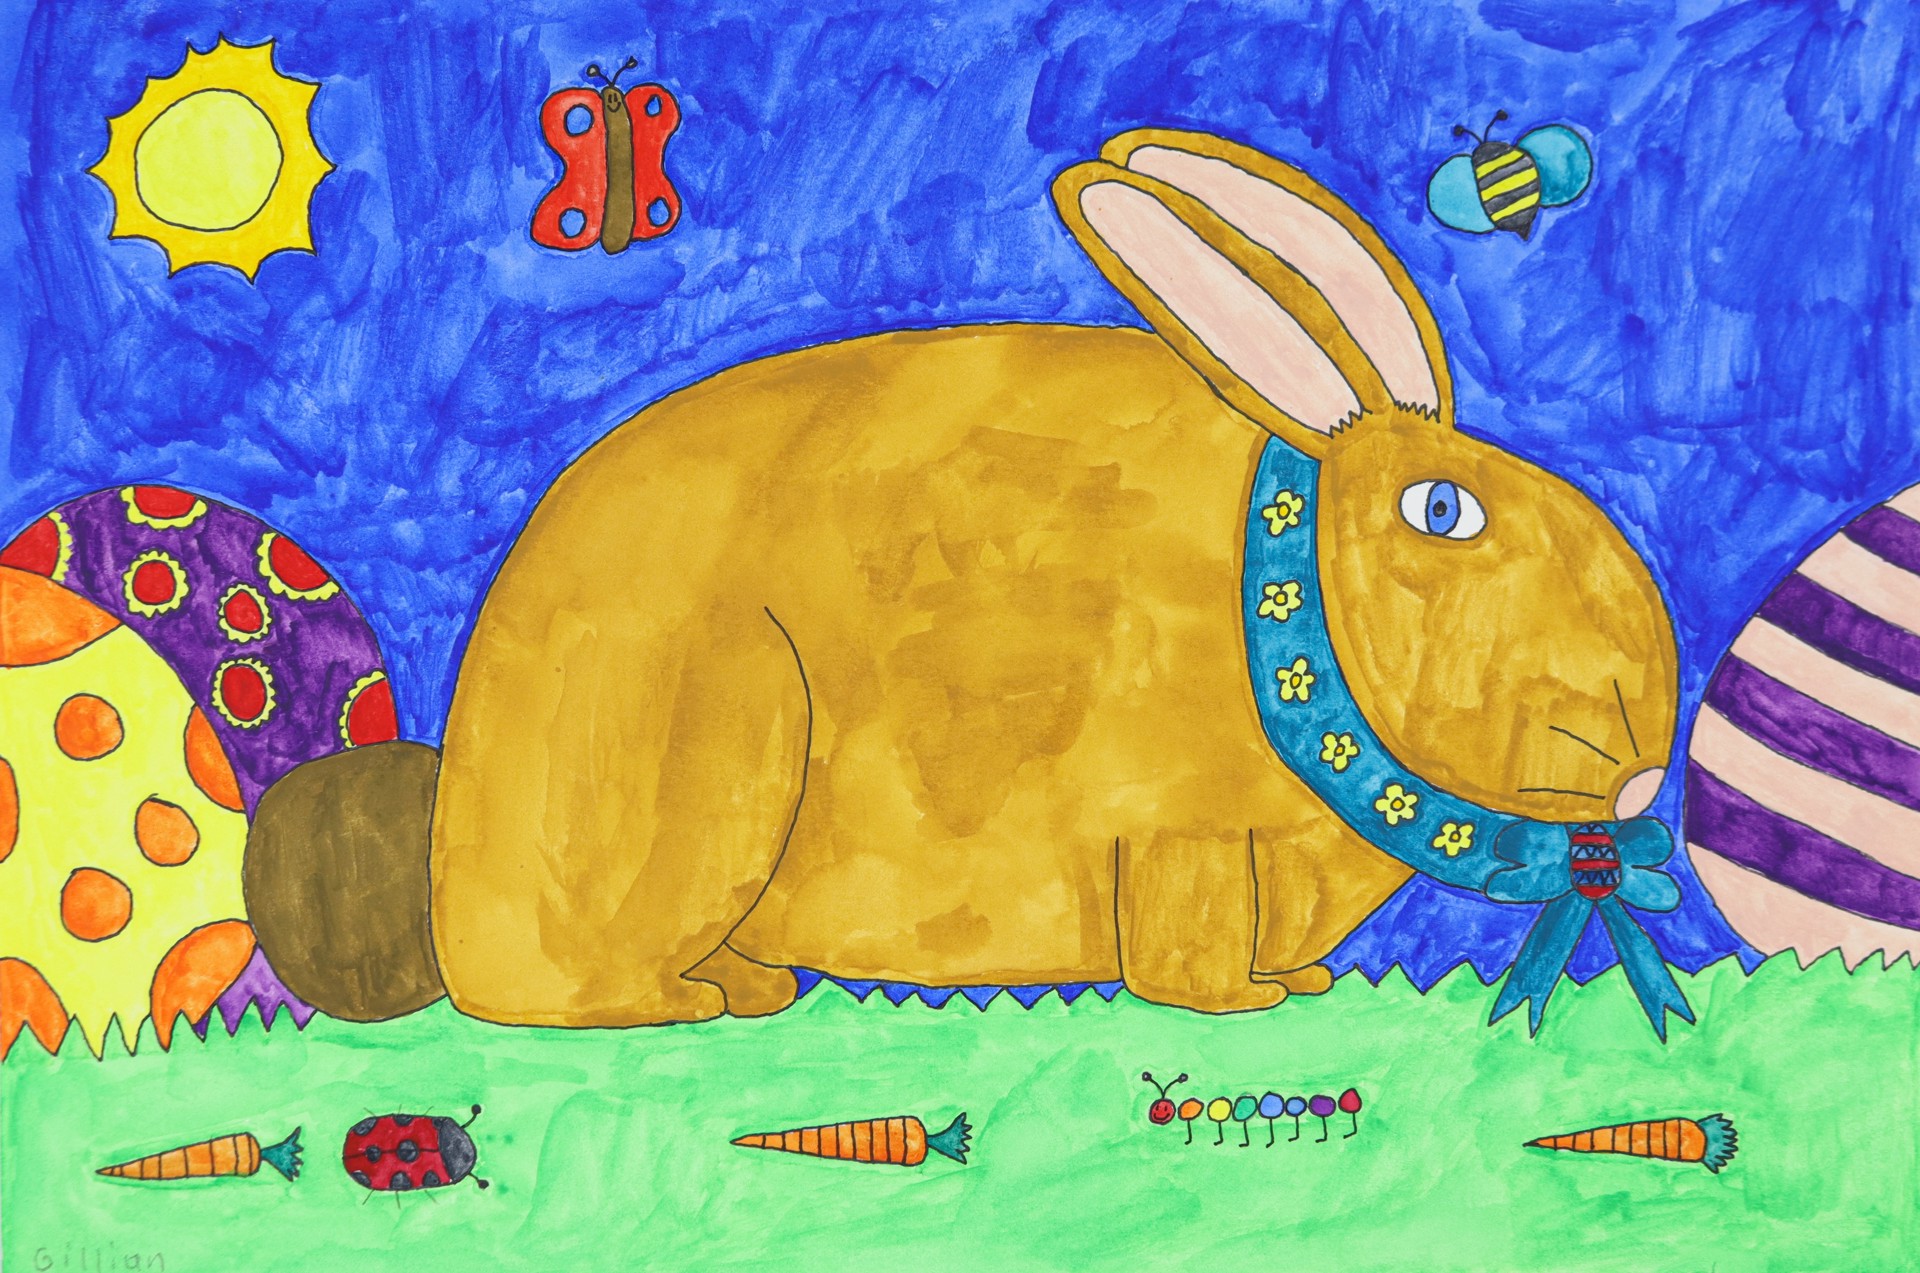 The Bunny in Easter Land by Gillian Patterson